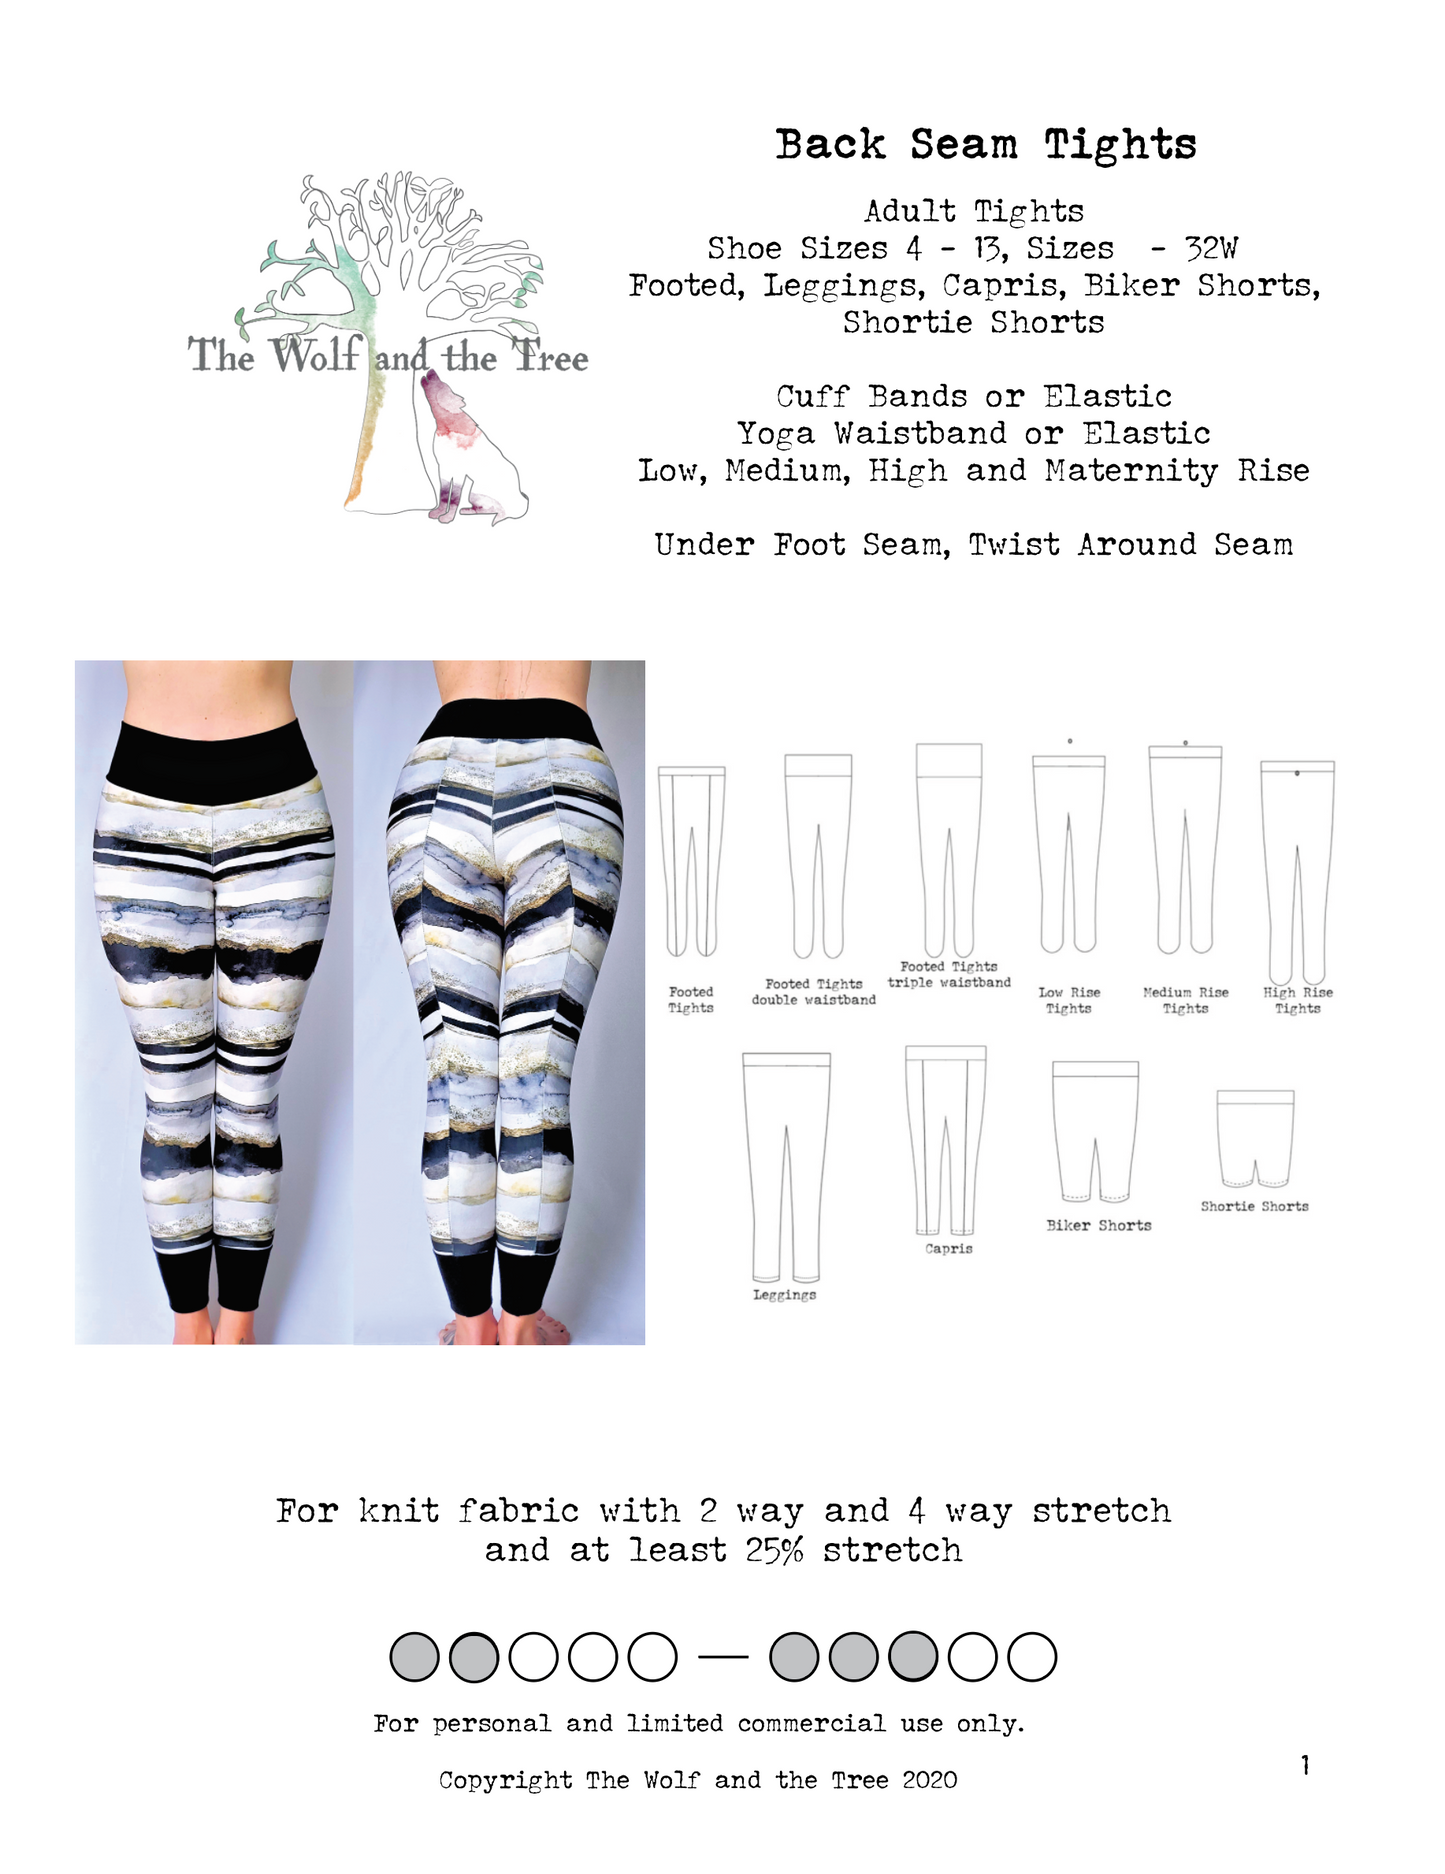 Adult Back Seam Tights {Footed Tights - Leggings - Capris - Shorts}